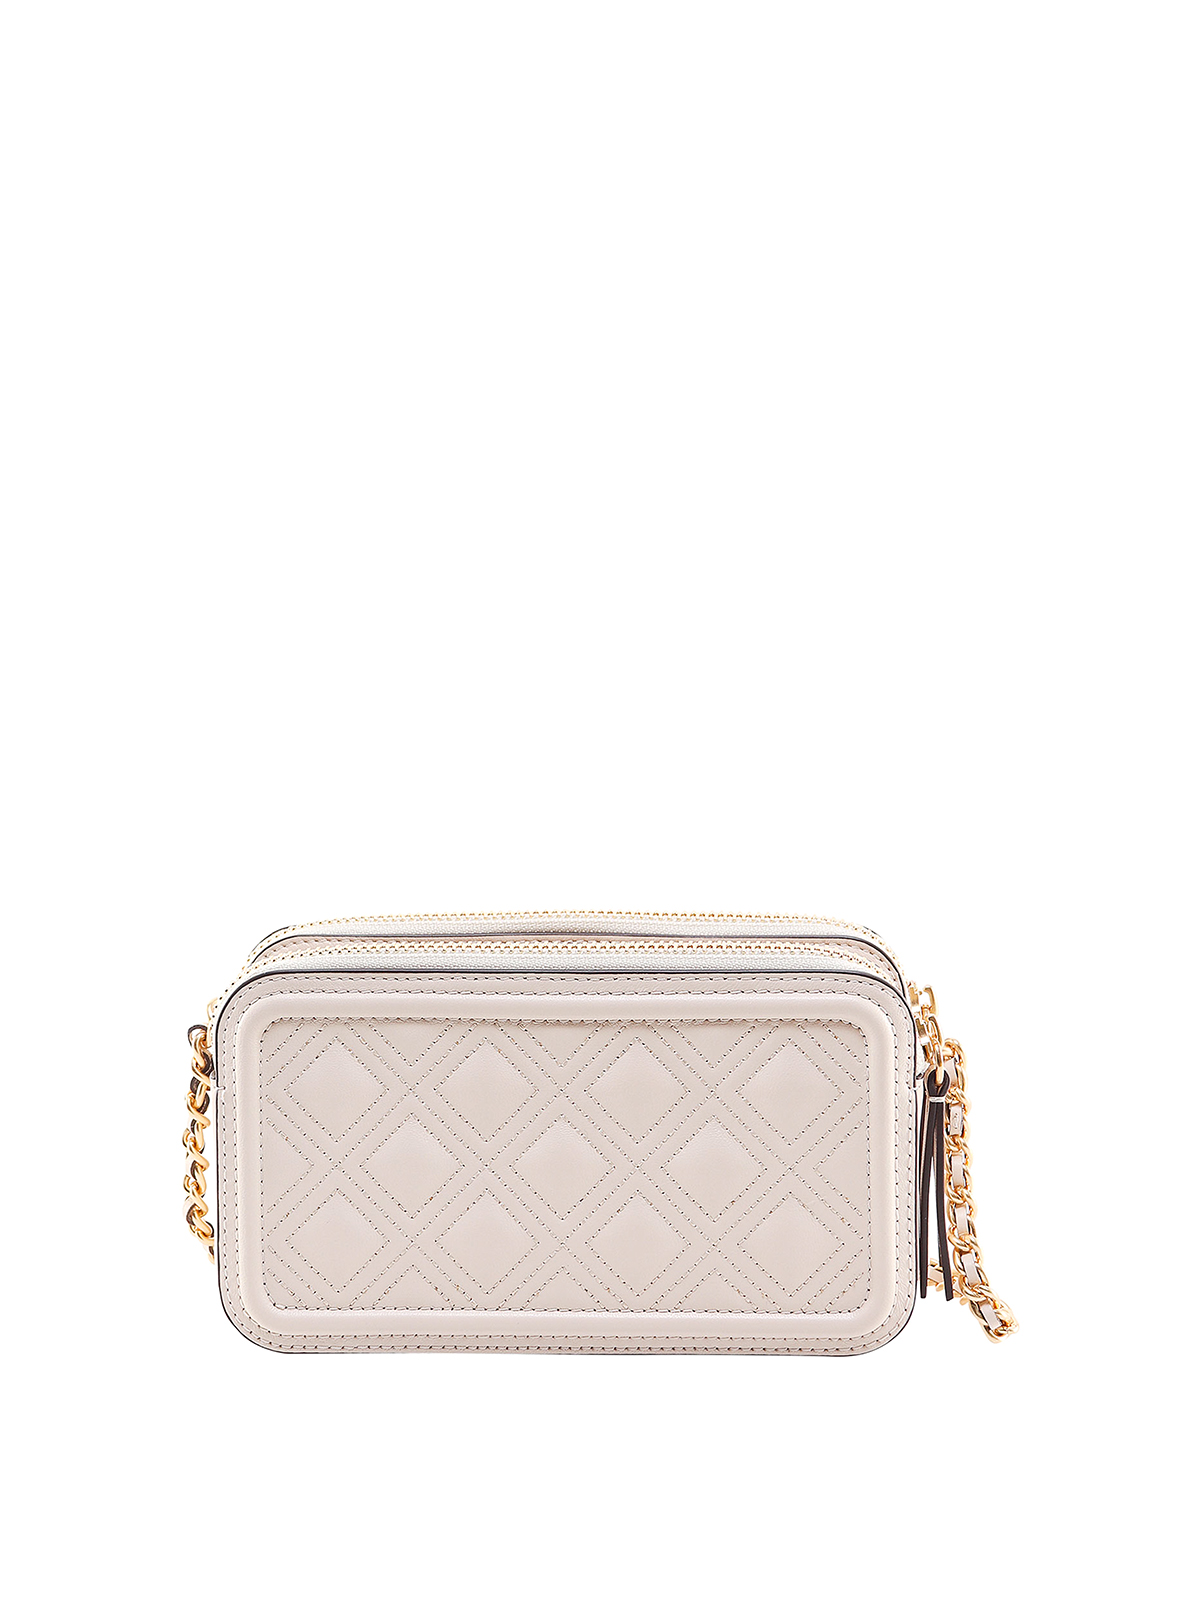 Cross body bags Tory Burch - Leather bag - 79403122 | Shop online at iKRIX